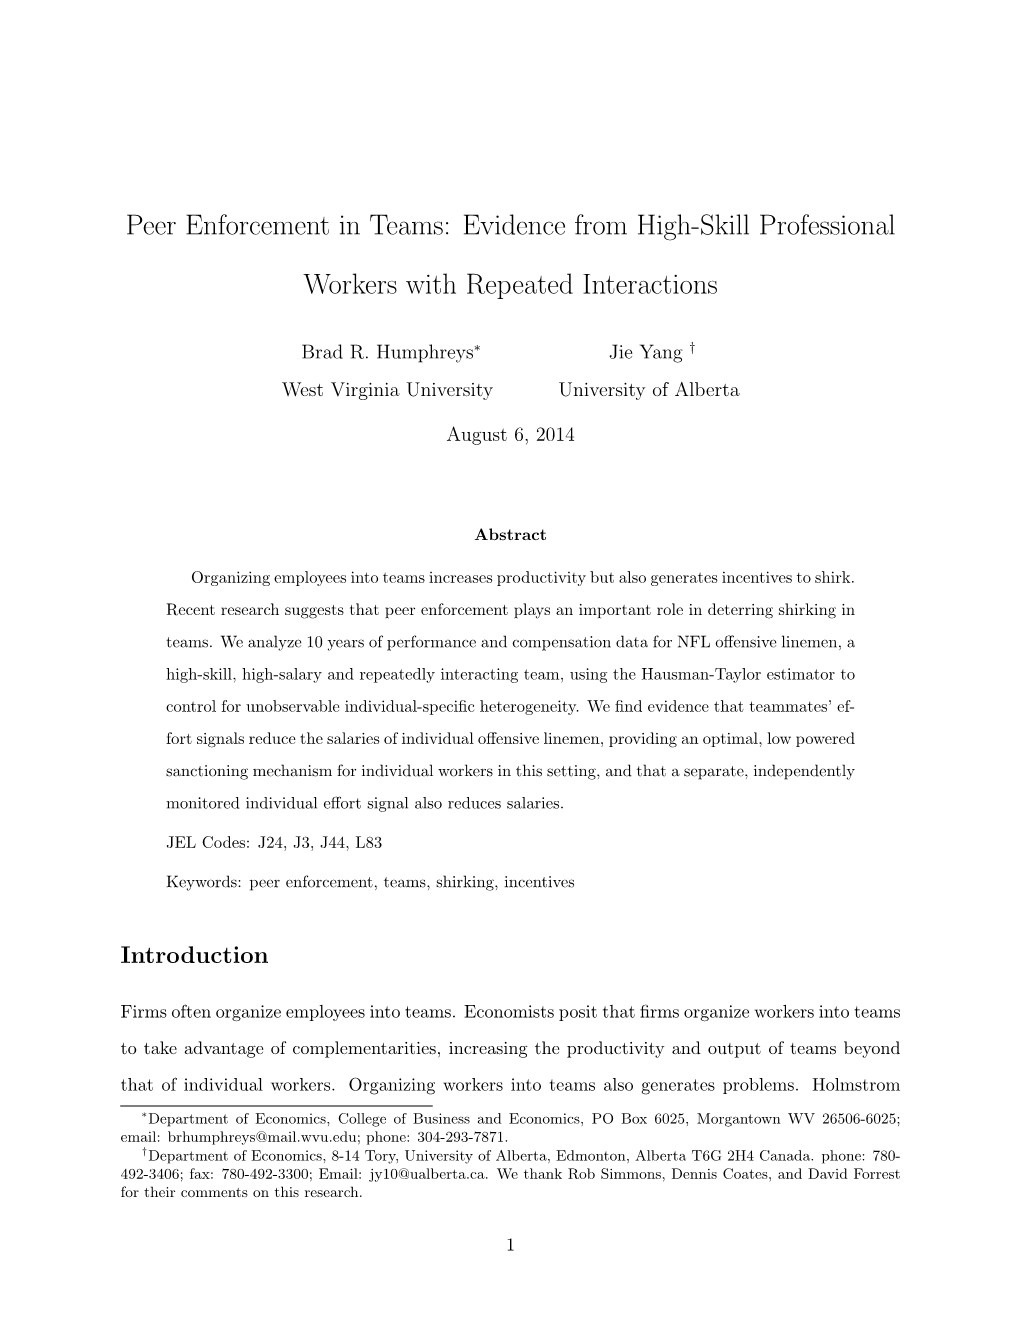 Evidence from High-Skill Professional Workers